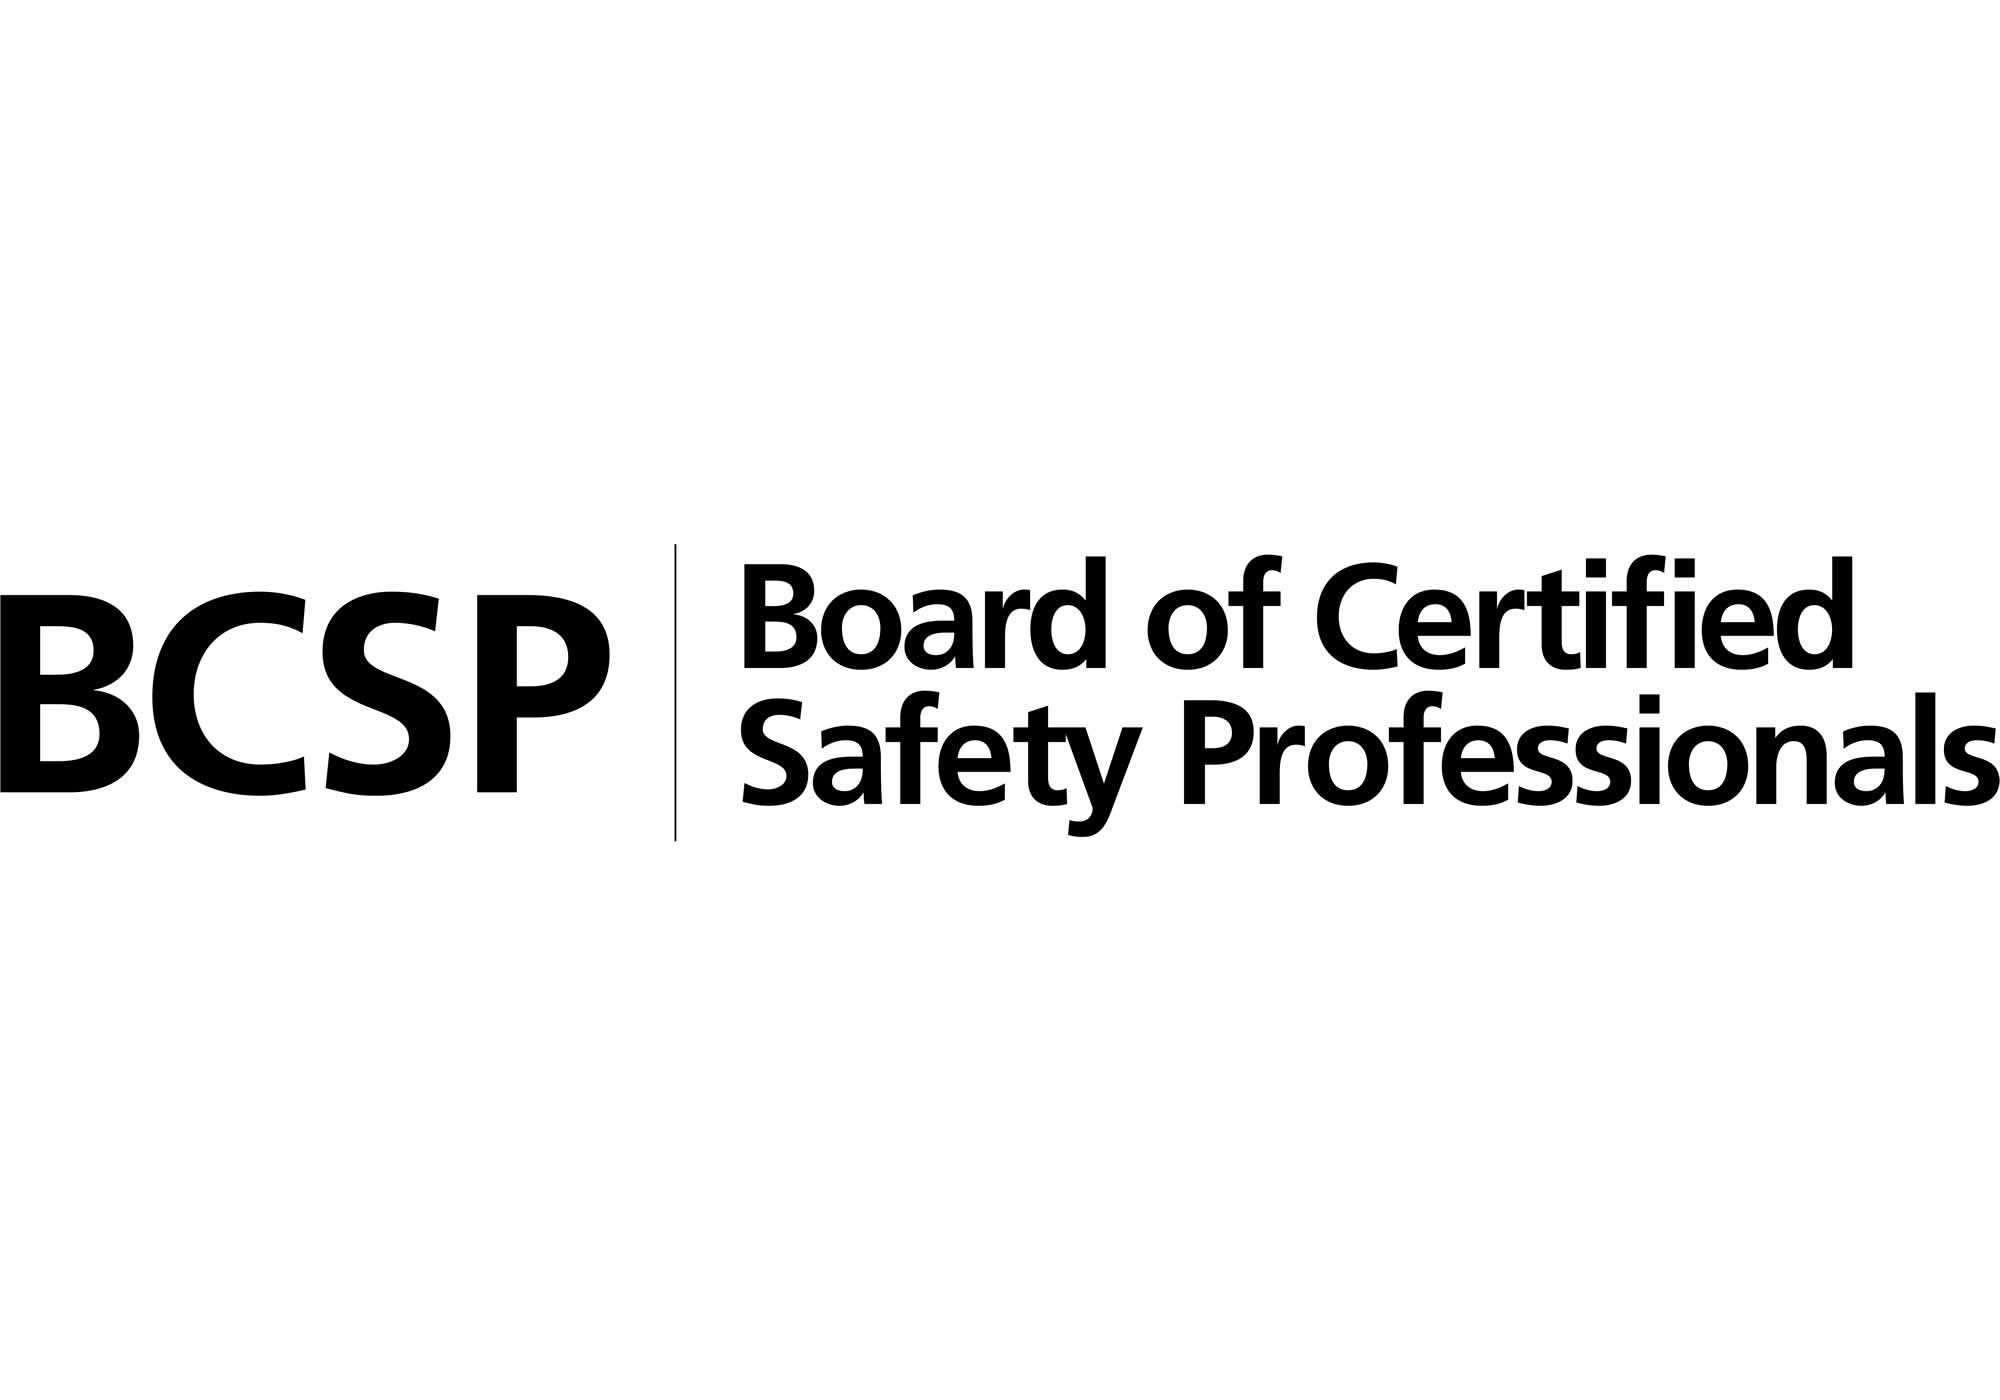 naem-2021-certifications-bcsp-board-of-certified-safety-professionals-1000x700